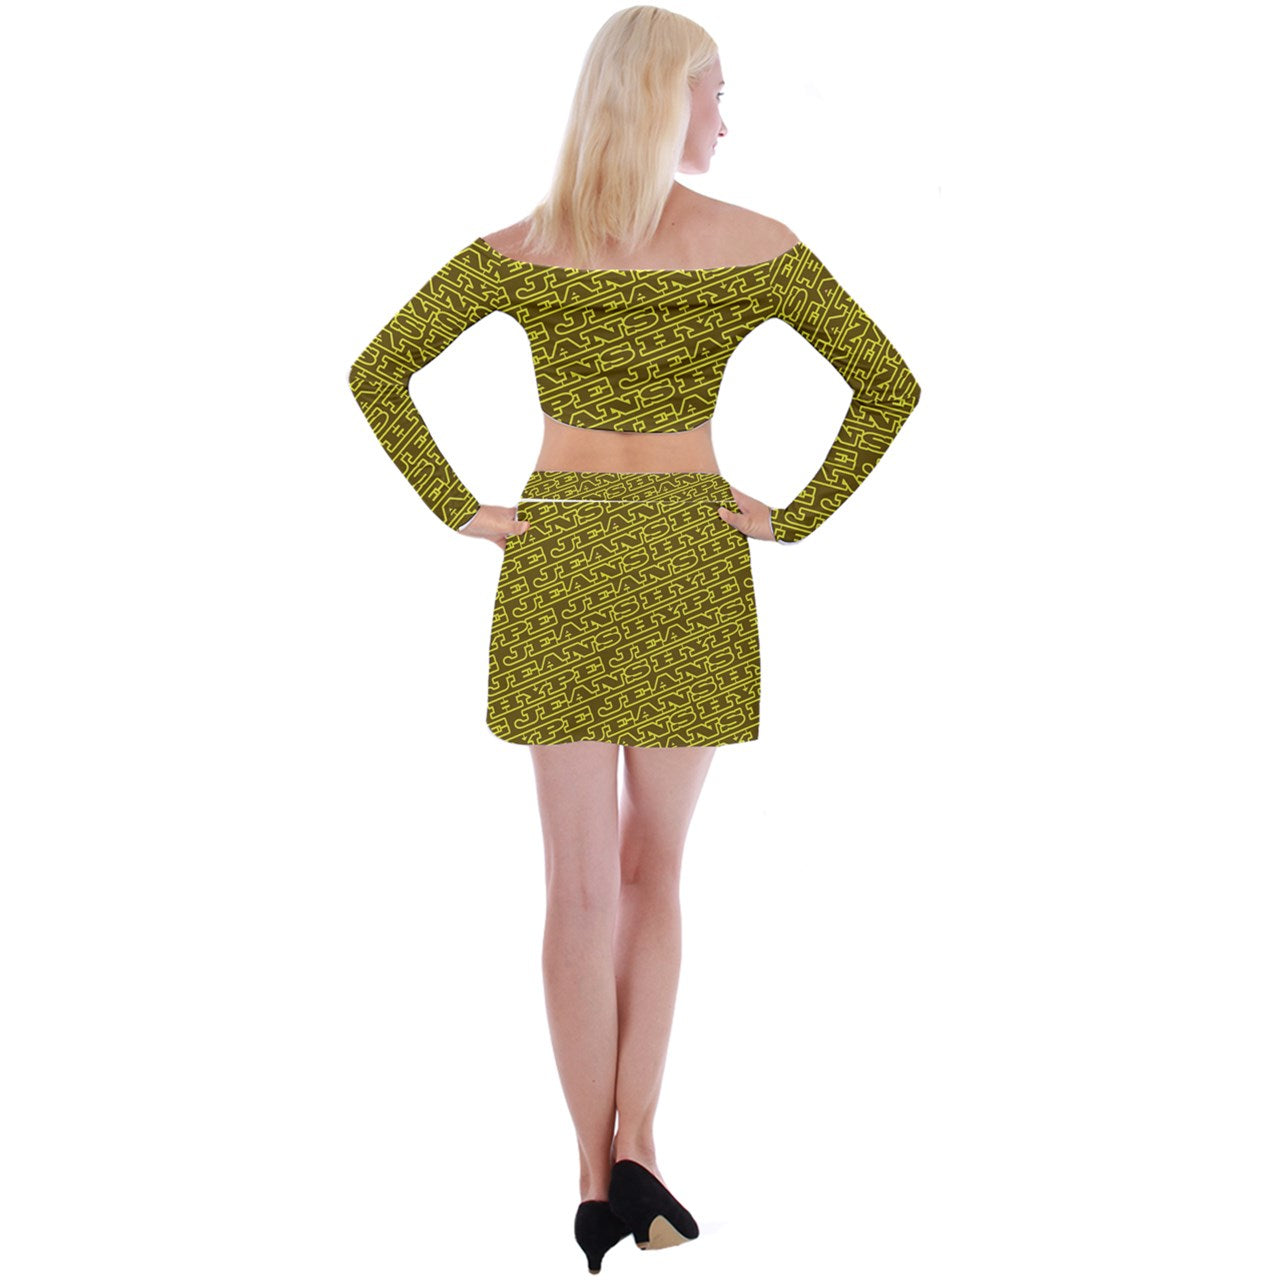 Hype Jeans Company Off Shoulder Top with Mini Skirt Set brown and yellow